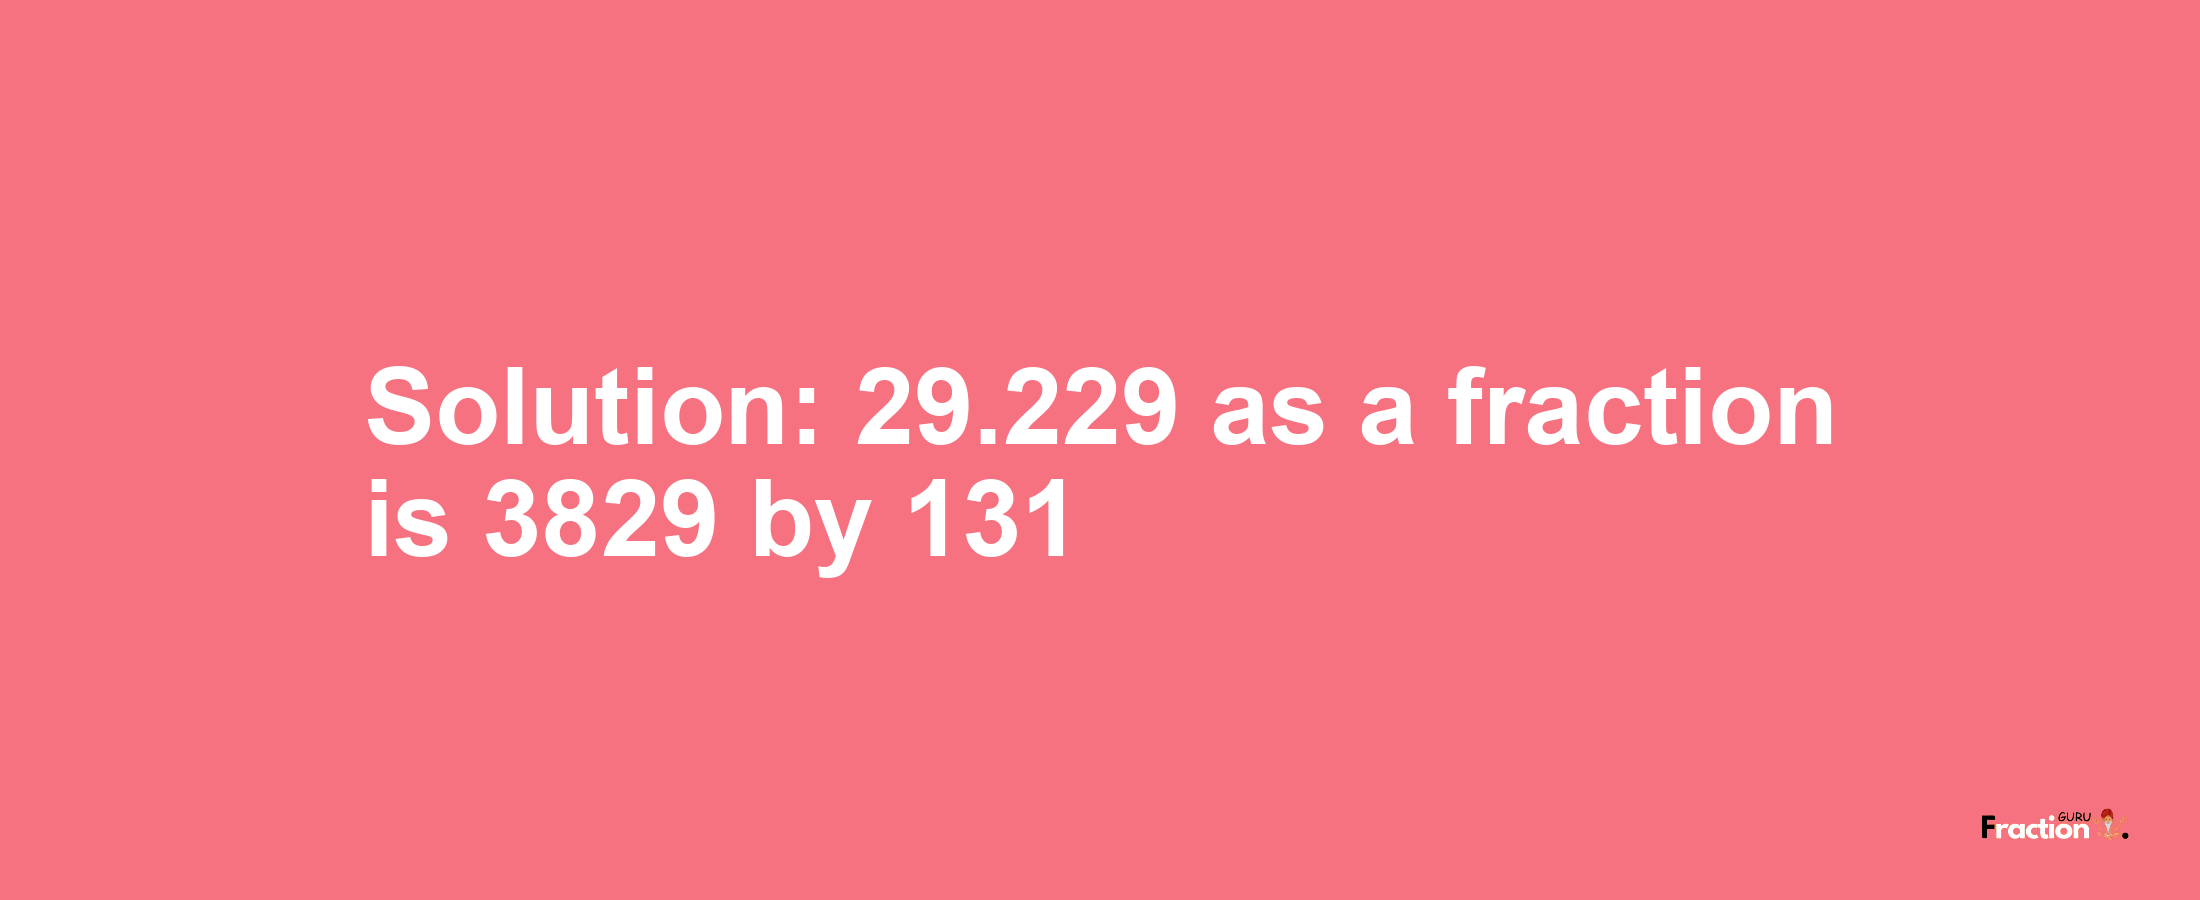 Solution:29.229 as a fraction is 3829/131